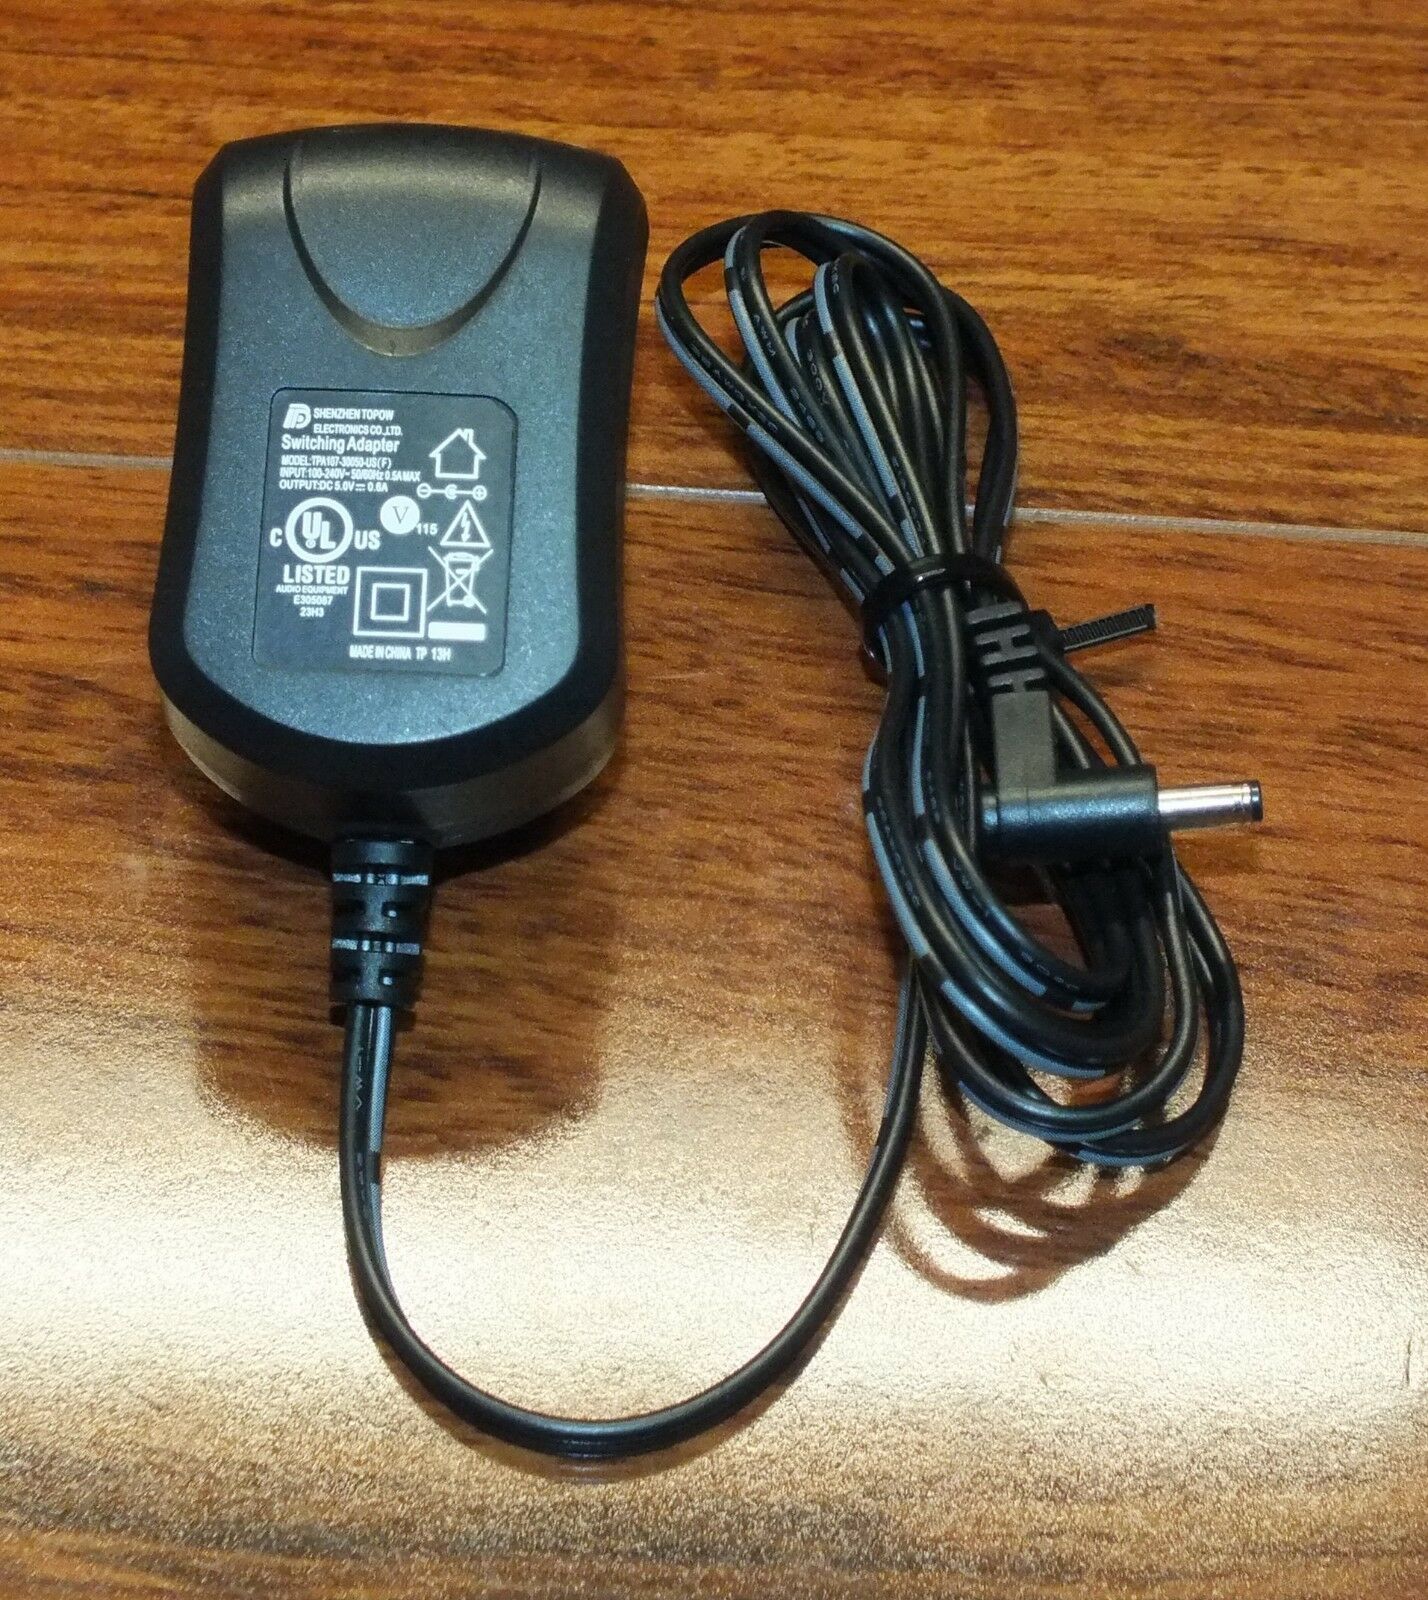 Shenzhen (TPA107-30050-US) 5V 0.6A 50-60Hz AC Switching Adapter Power Supply Country/Region of Manufacture: China Typ